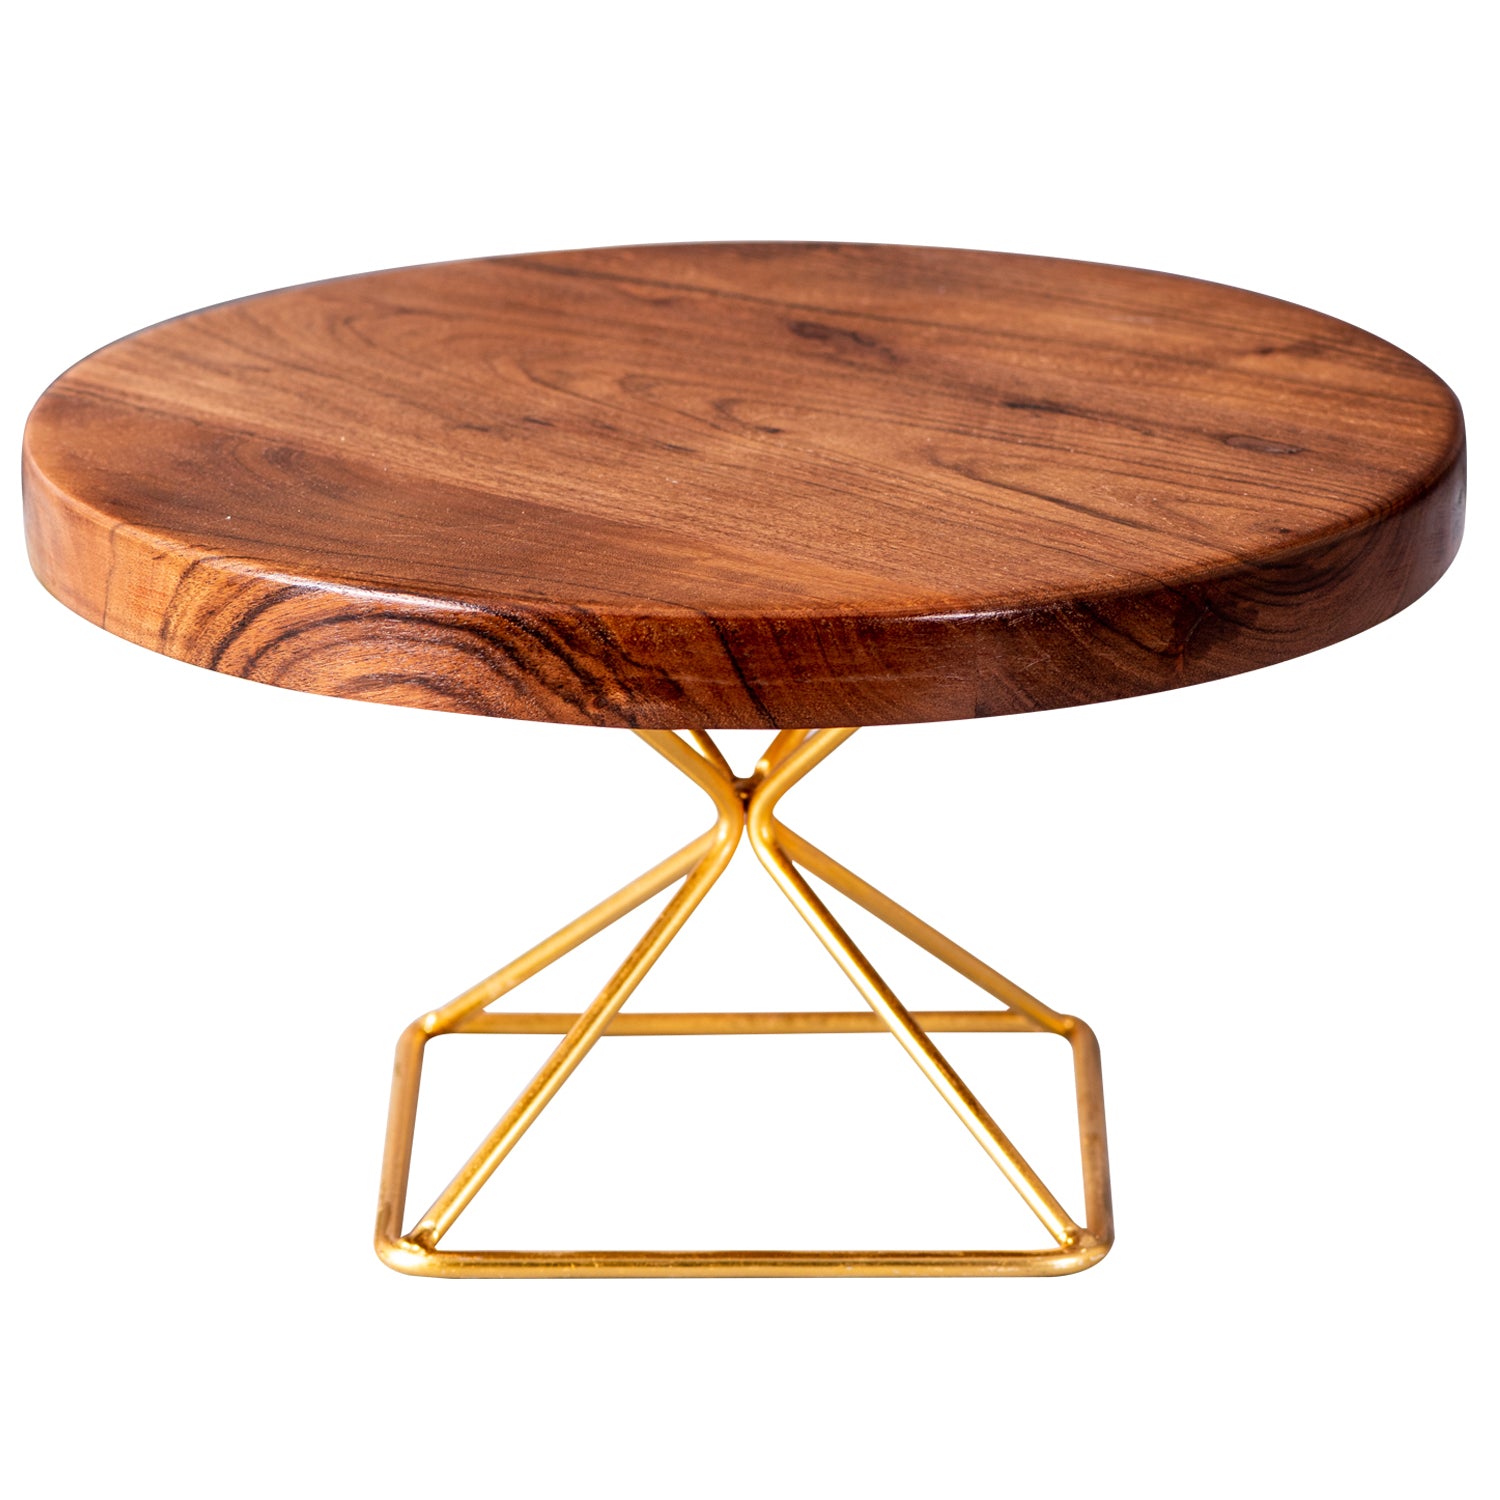 Empty cake stand, table top 21384412 PNG